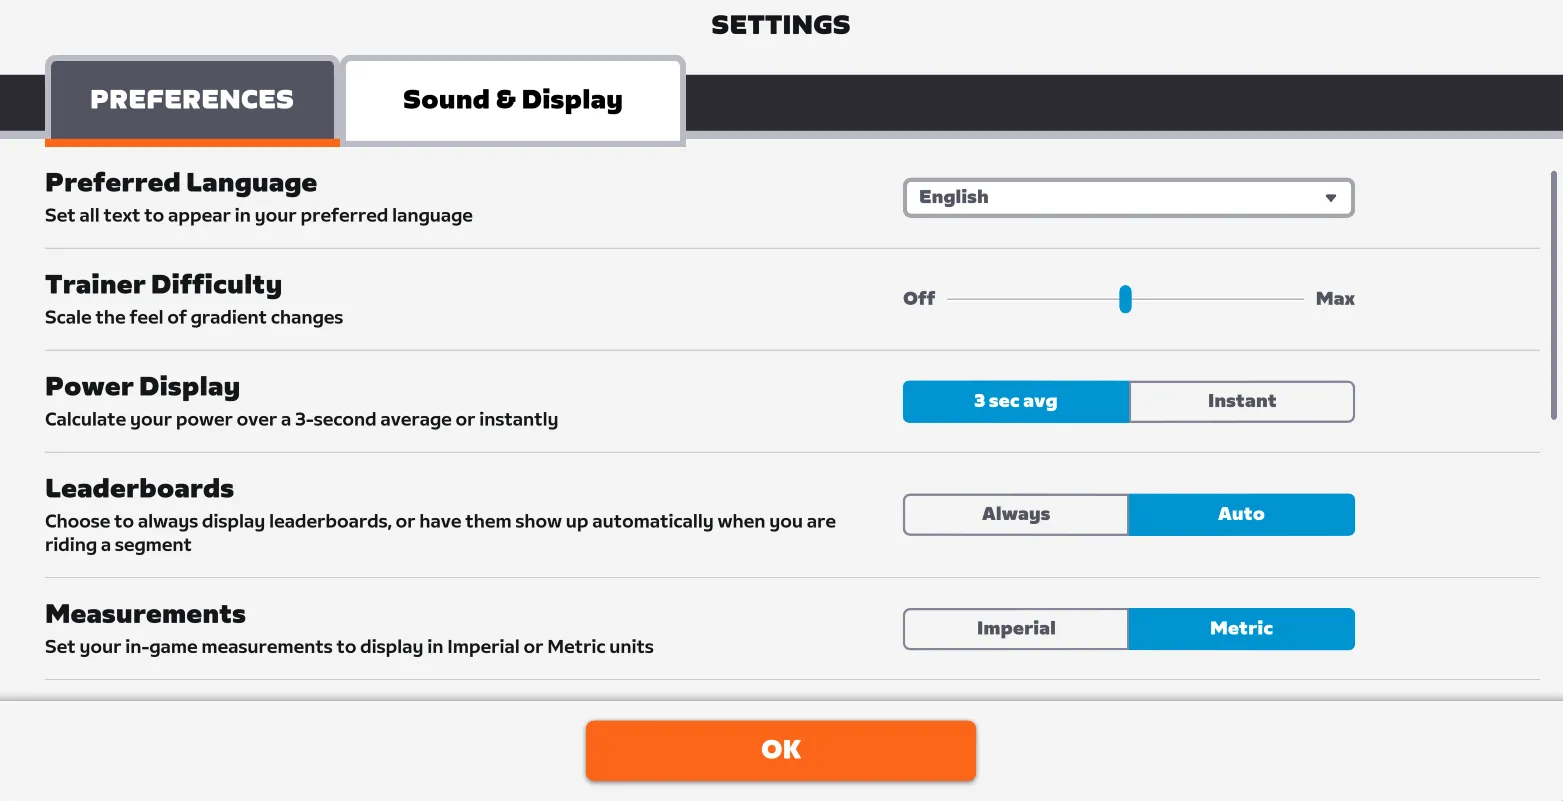 Switch to Sound and Display tab